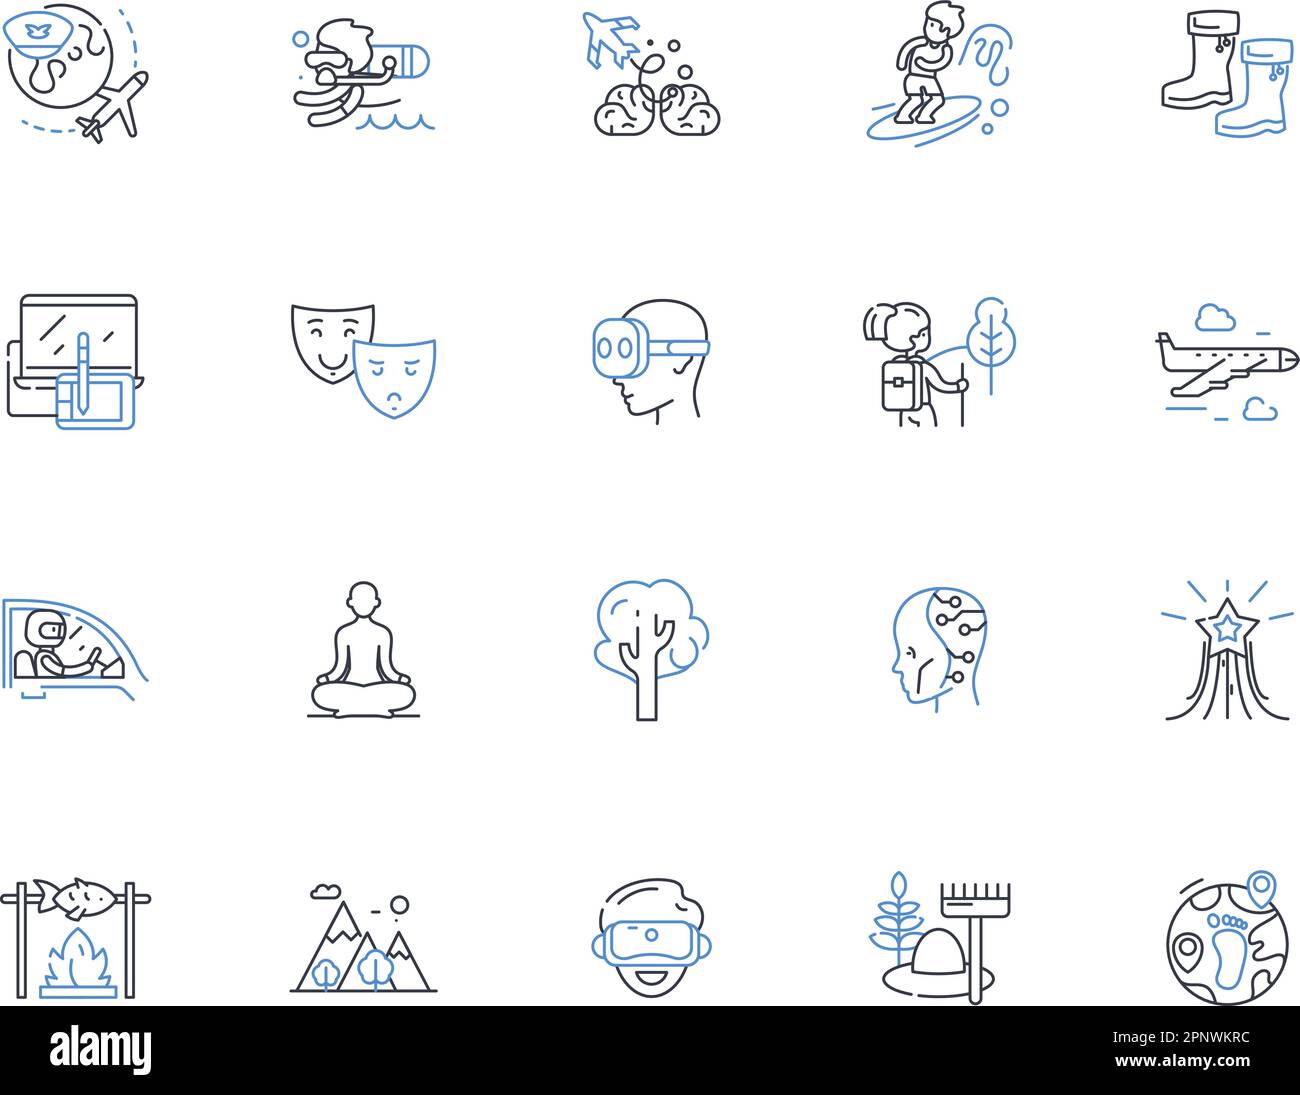 Behavioral patterns line icons collection. Habits, Routines, Conditioning, Response, Reinforcement, Trigger, Compulsion vector and linear illustration Stock Vector